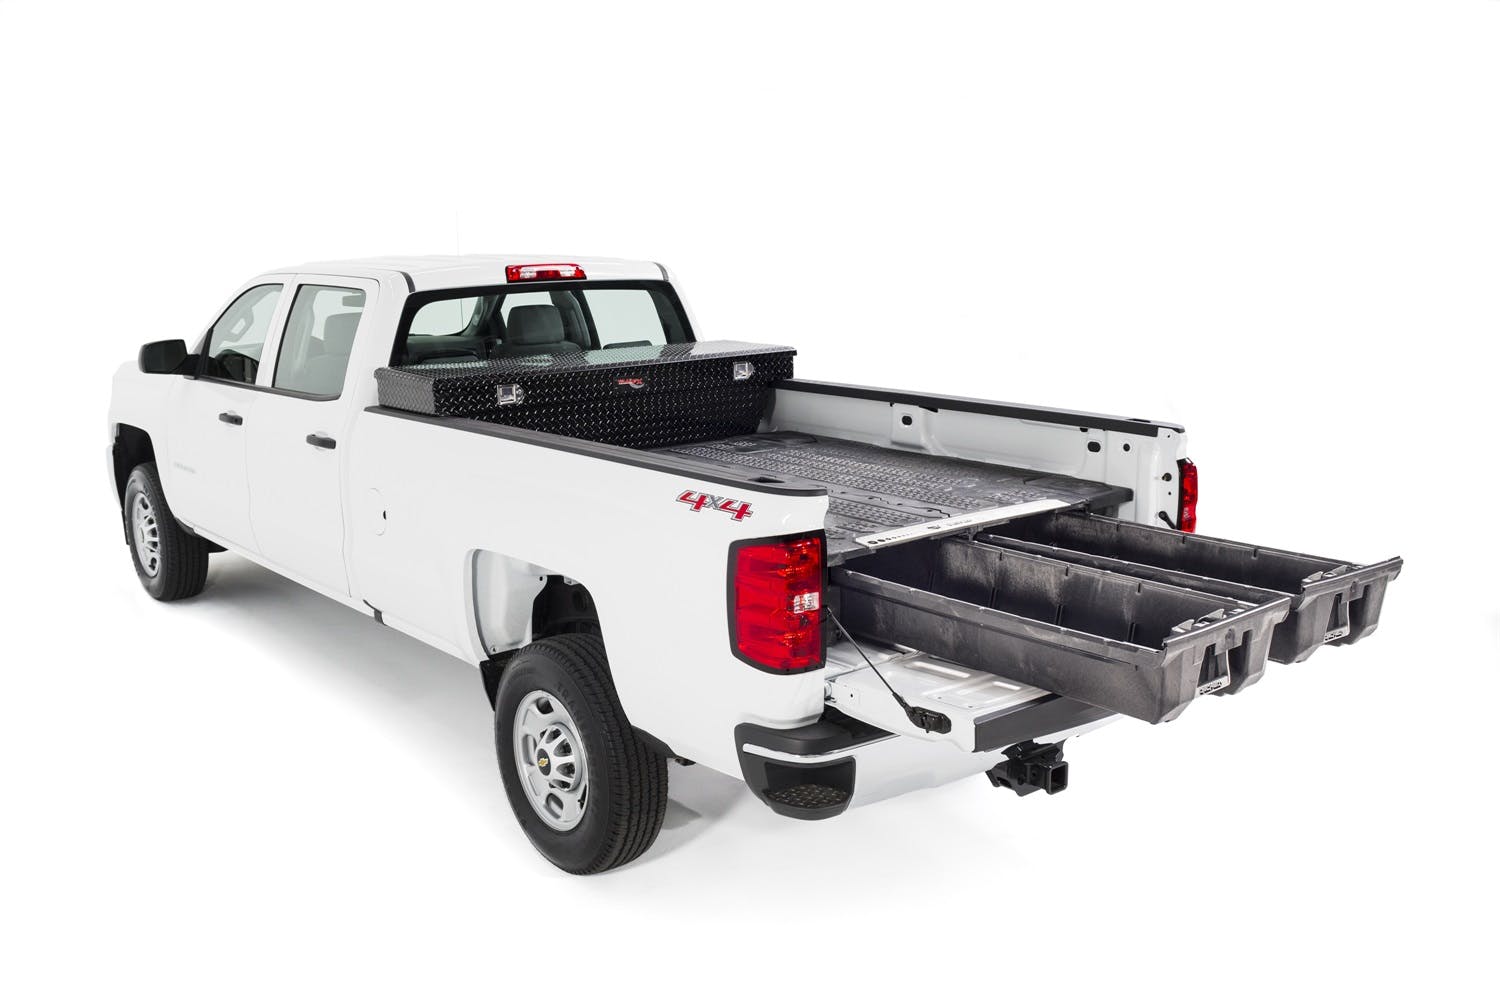 DECKED DG5 75.25 Two Drawer Storage System for A Full Size Pick Up Truck